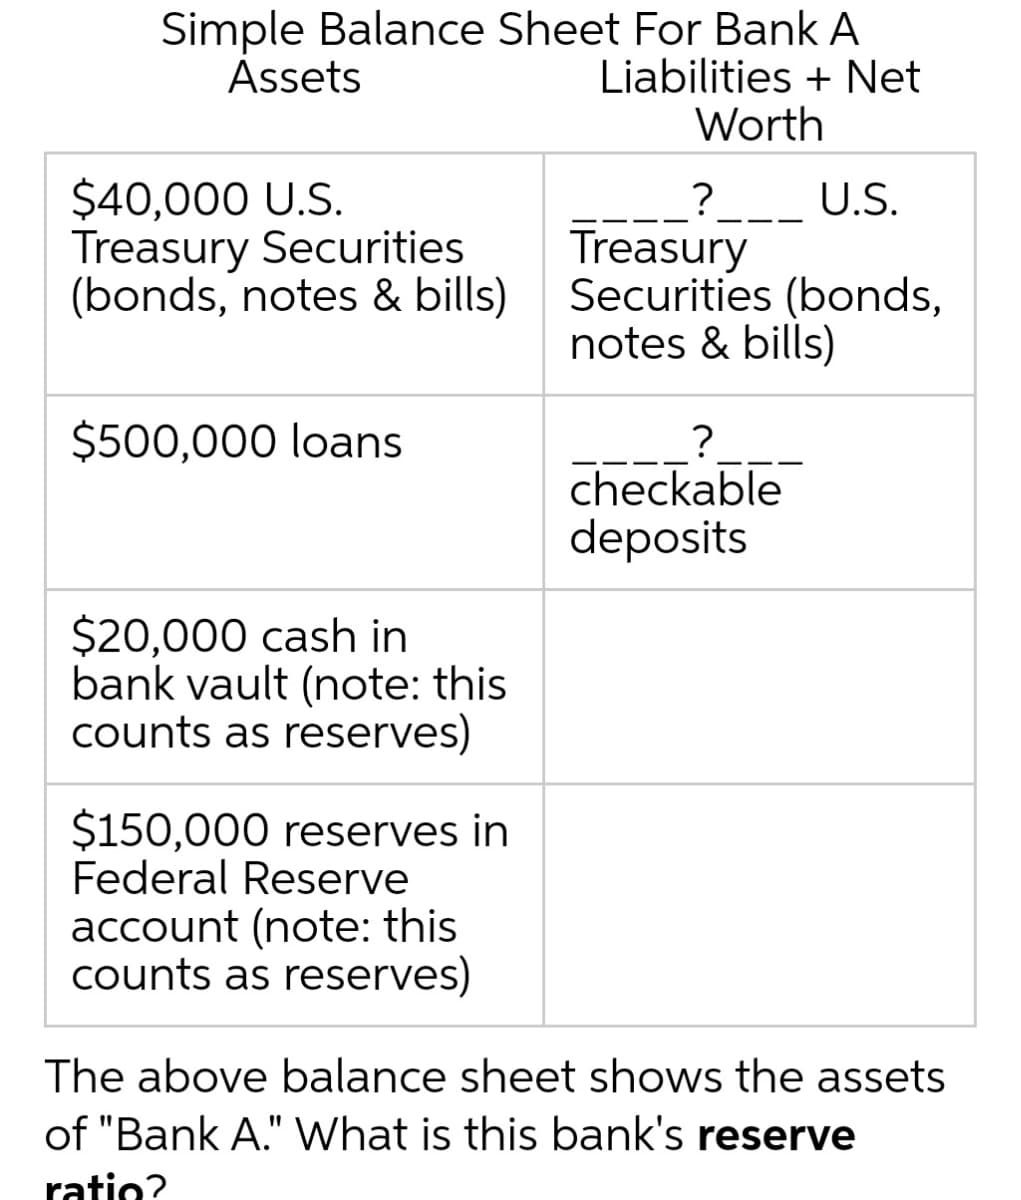 Simple Balance Sheet For Bank A
Liabilities + Net
Worth
Assets
$40,000 U.S.
Treasury Securities
(bonds, notes & bills)
?___ U.S.
Treasury
Securities (bonds,
notes & bills)
$500,000 loans
checkable
deposits
$20,000 cash in
bank vault (note: this
counts as reserves)
$150,000 reserves in
Federal Reserve
account (note: this
counts as reserves)
The above balance sheet shows the assets
of "Bank A." What is this bank's reserve
ratio?
